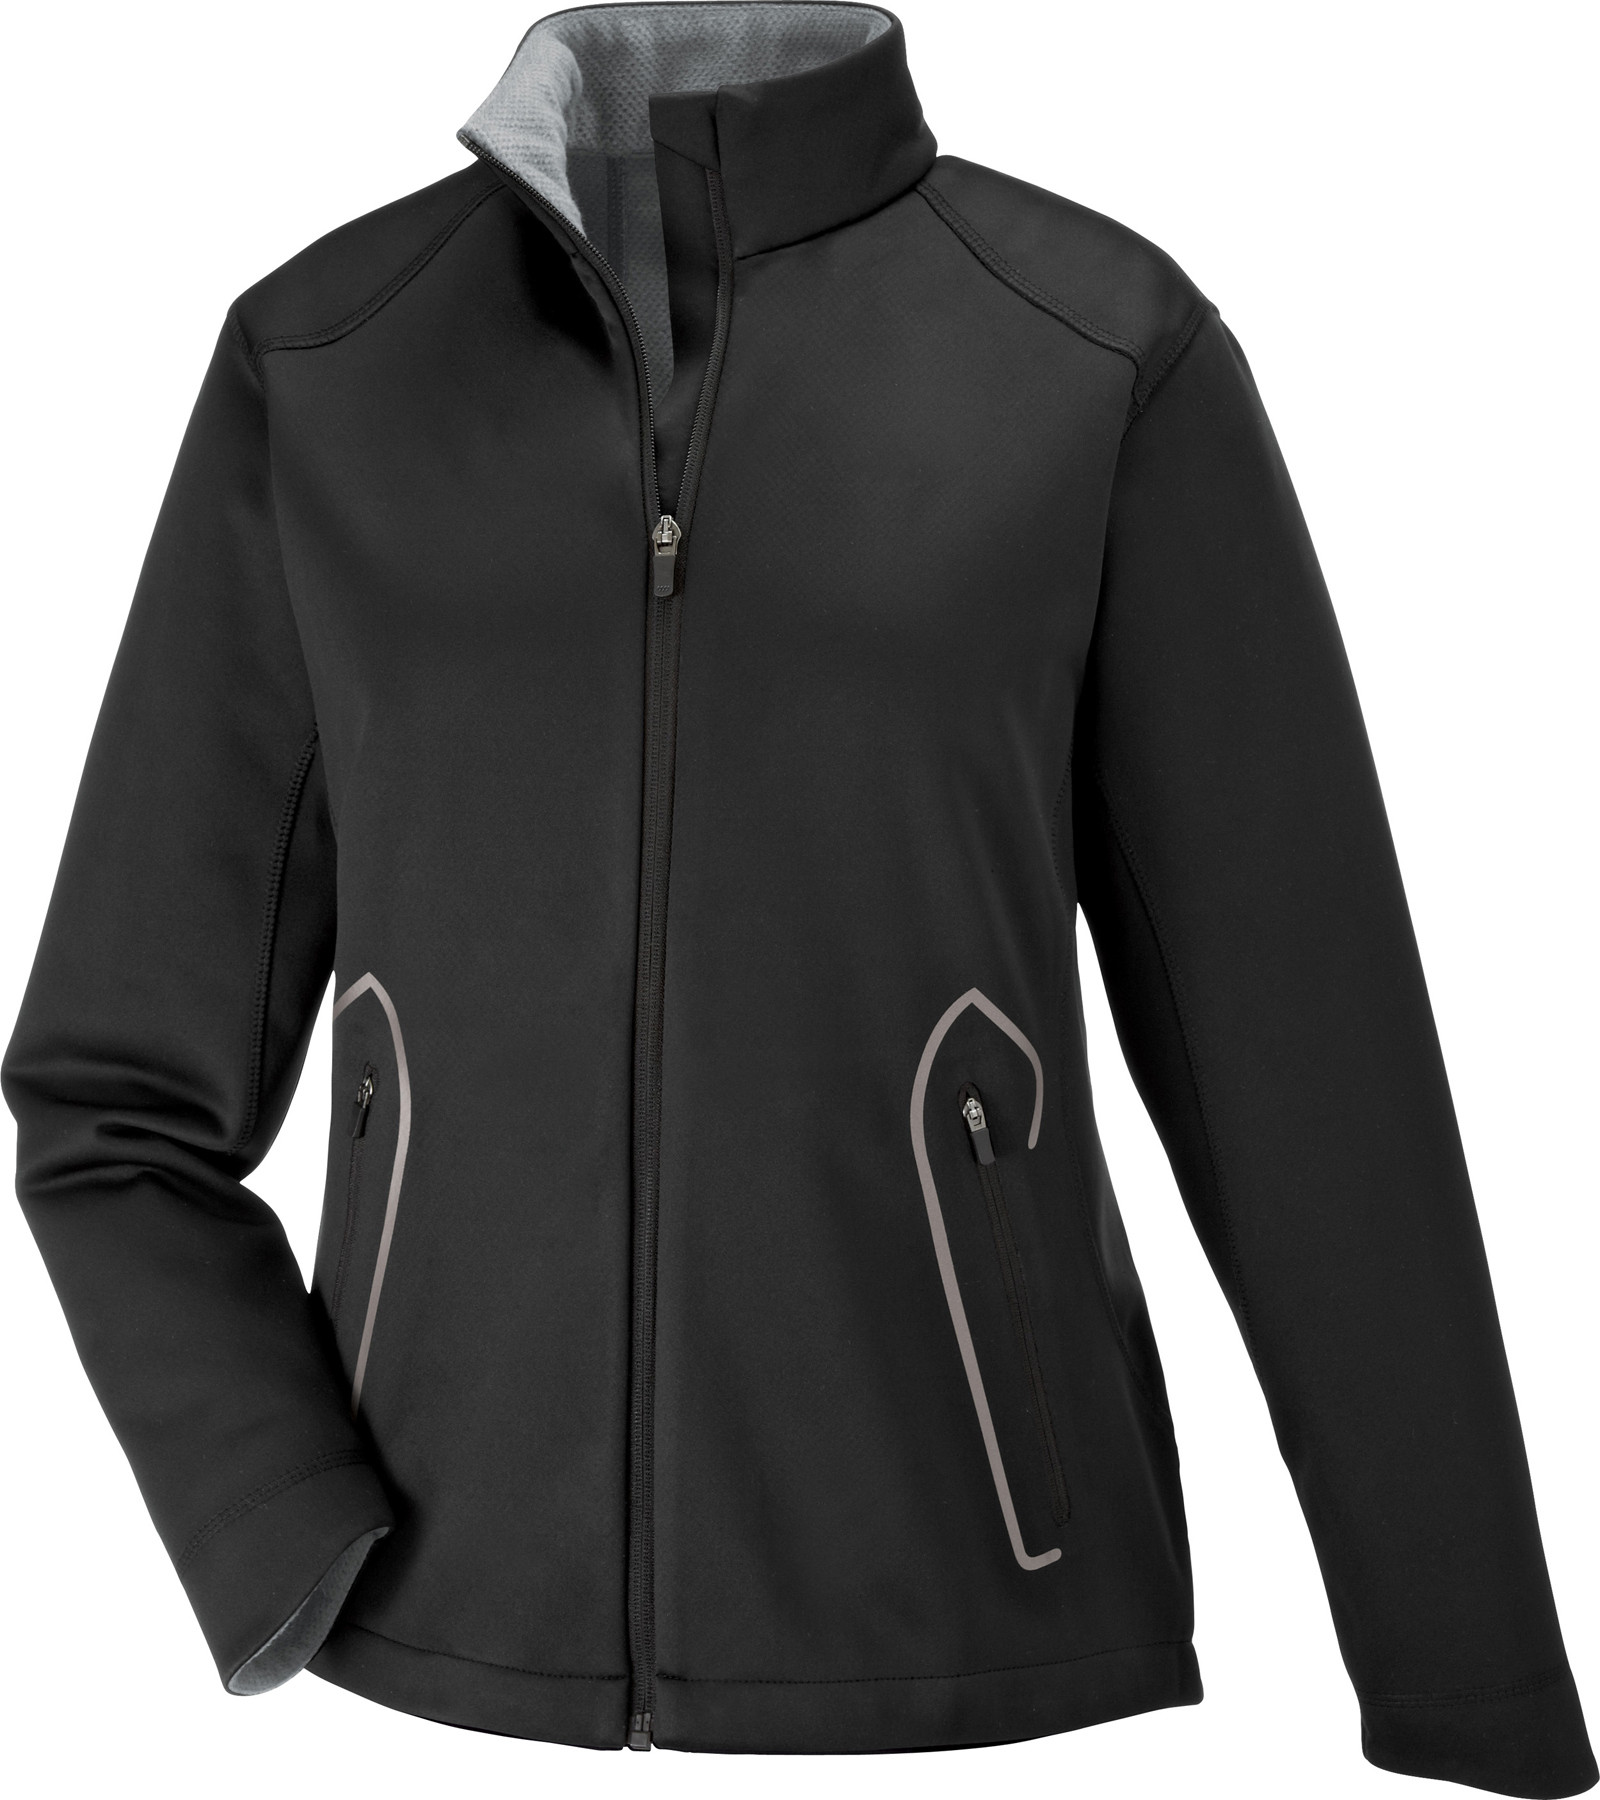 Ash City Performance Jackets 78655 - Splice Ladies' Soft Shell Jacket With Laser Welding